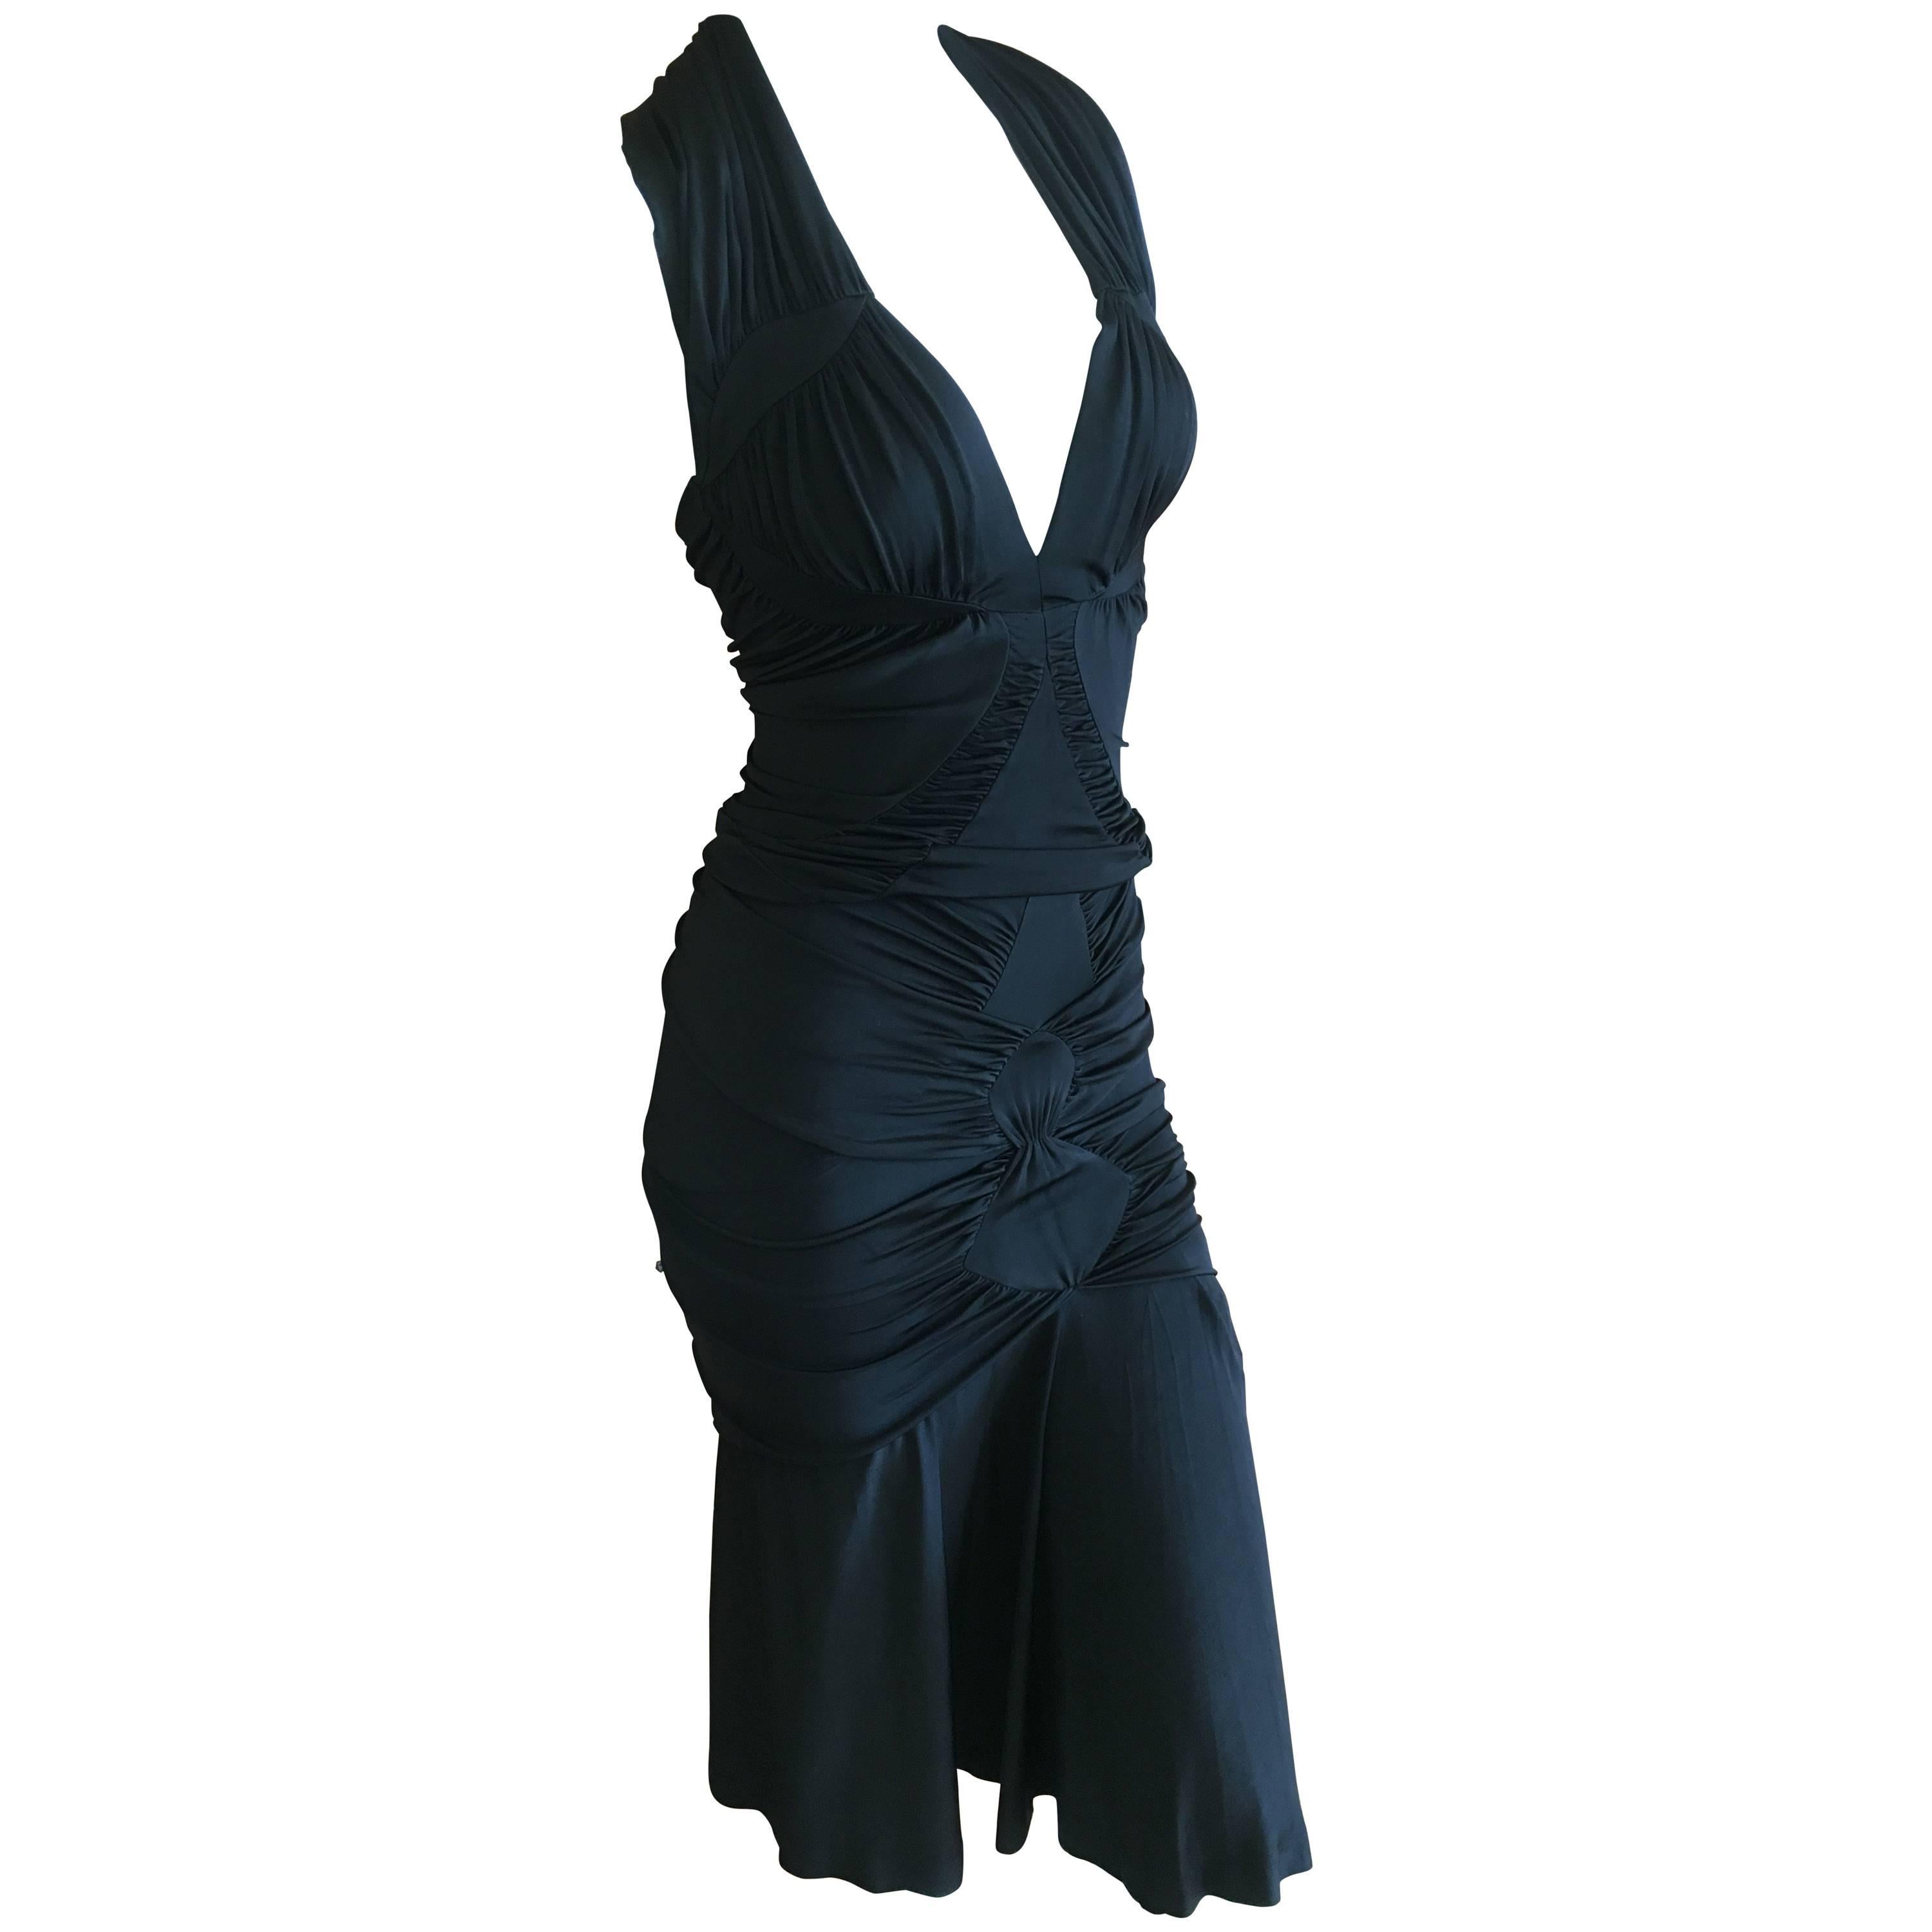 Yves Saint Laurent by Tom Ford Black Two Piece Cocktail Dress For Sale